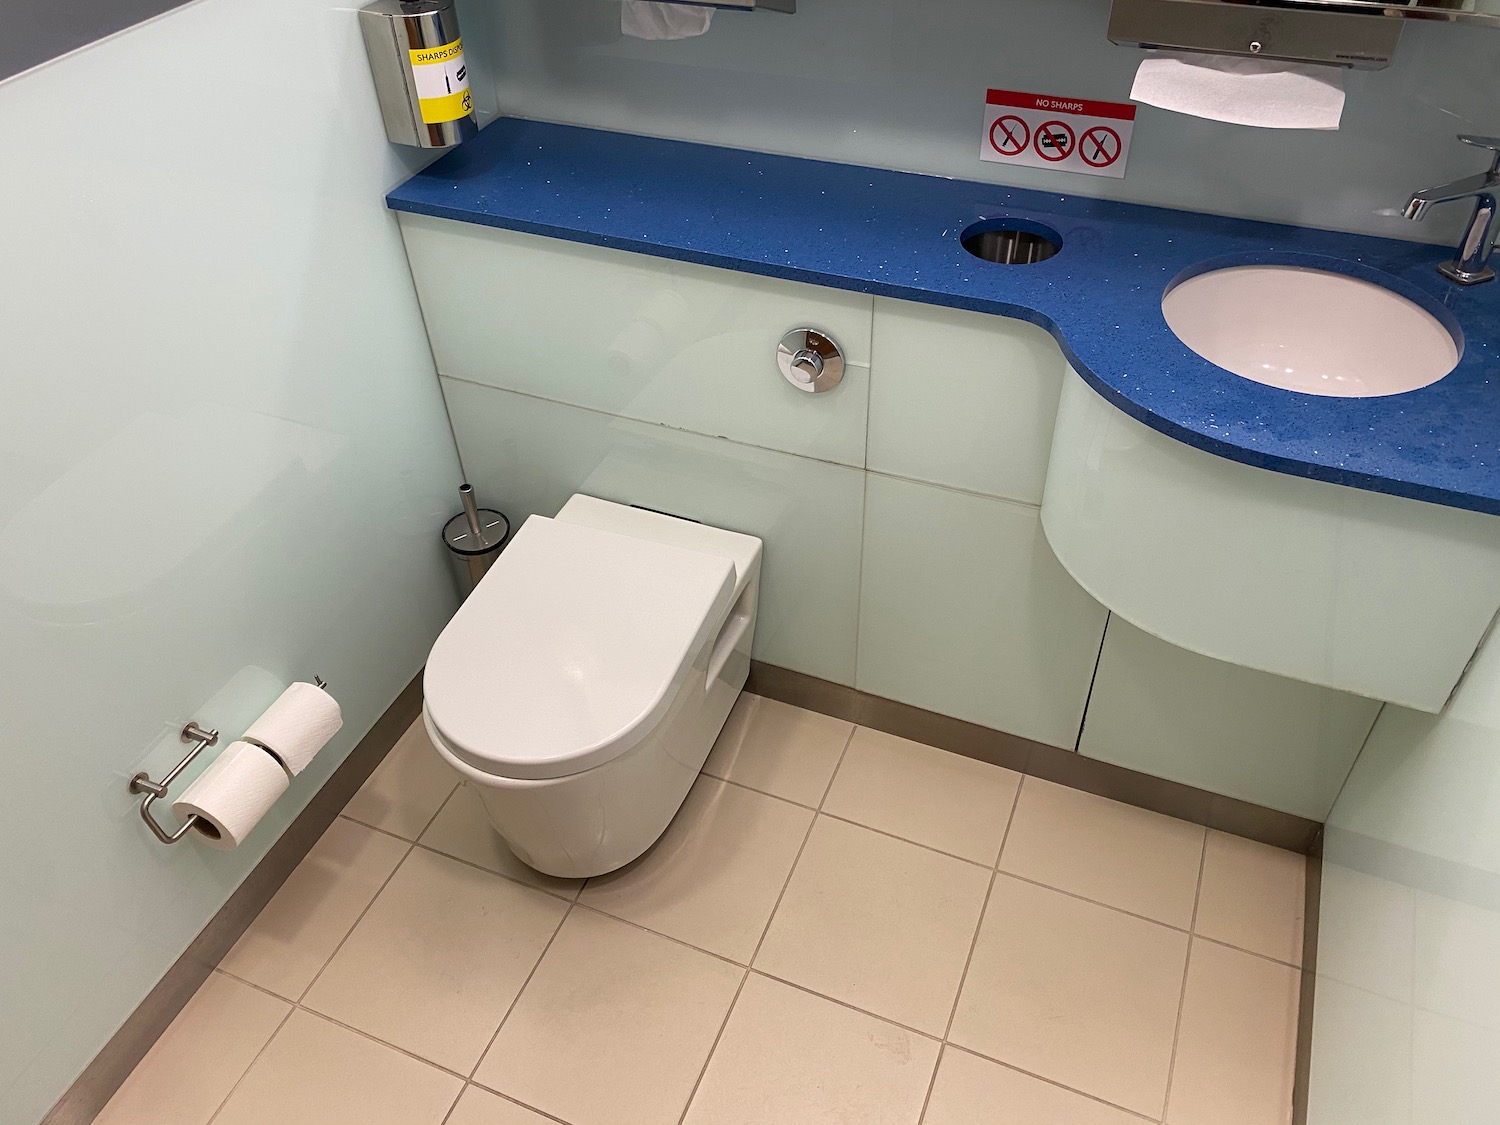 a bathroom with a blue countertop and toilet